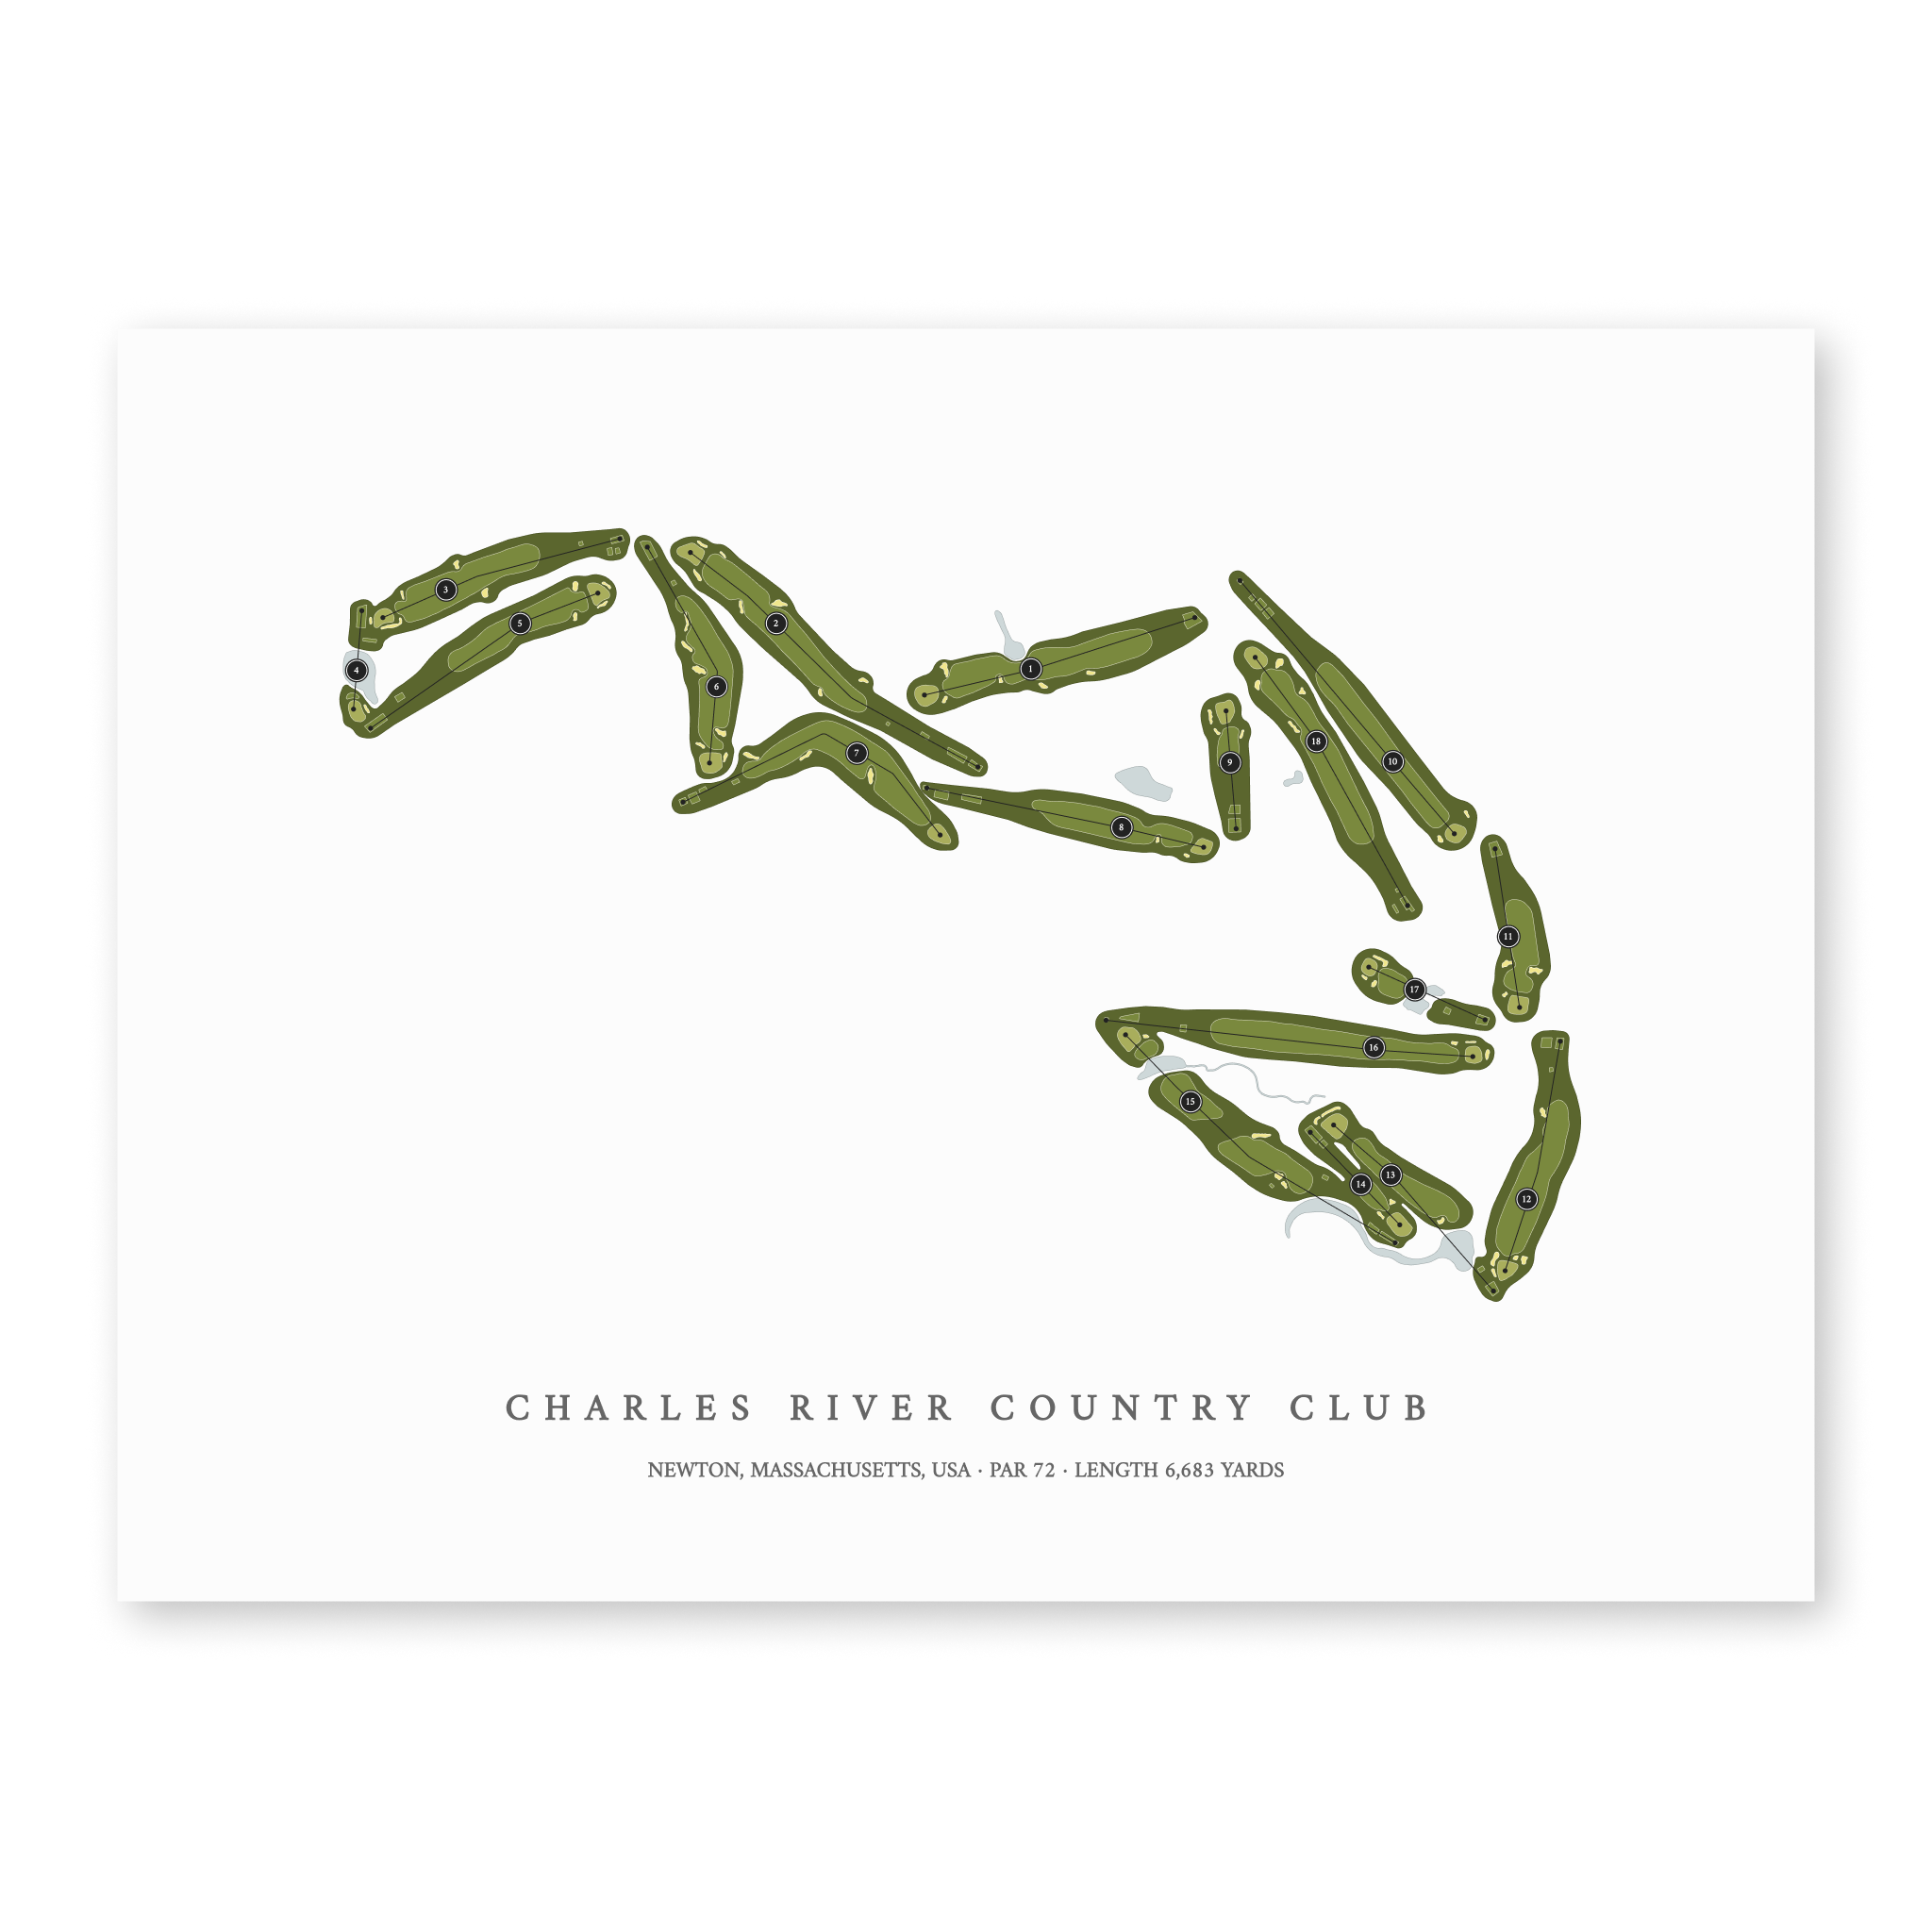 Charles River Country Club| Golf Course Print | Unframed With Hole Numbers #hole numbers_yes